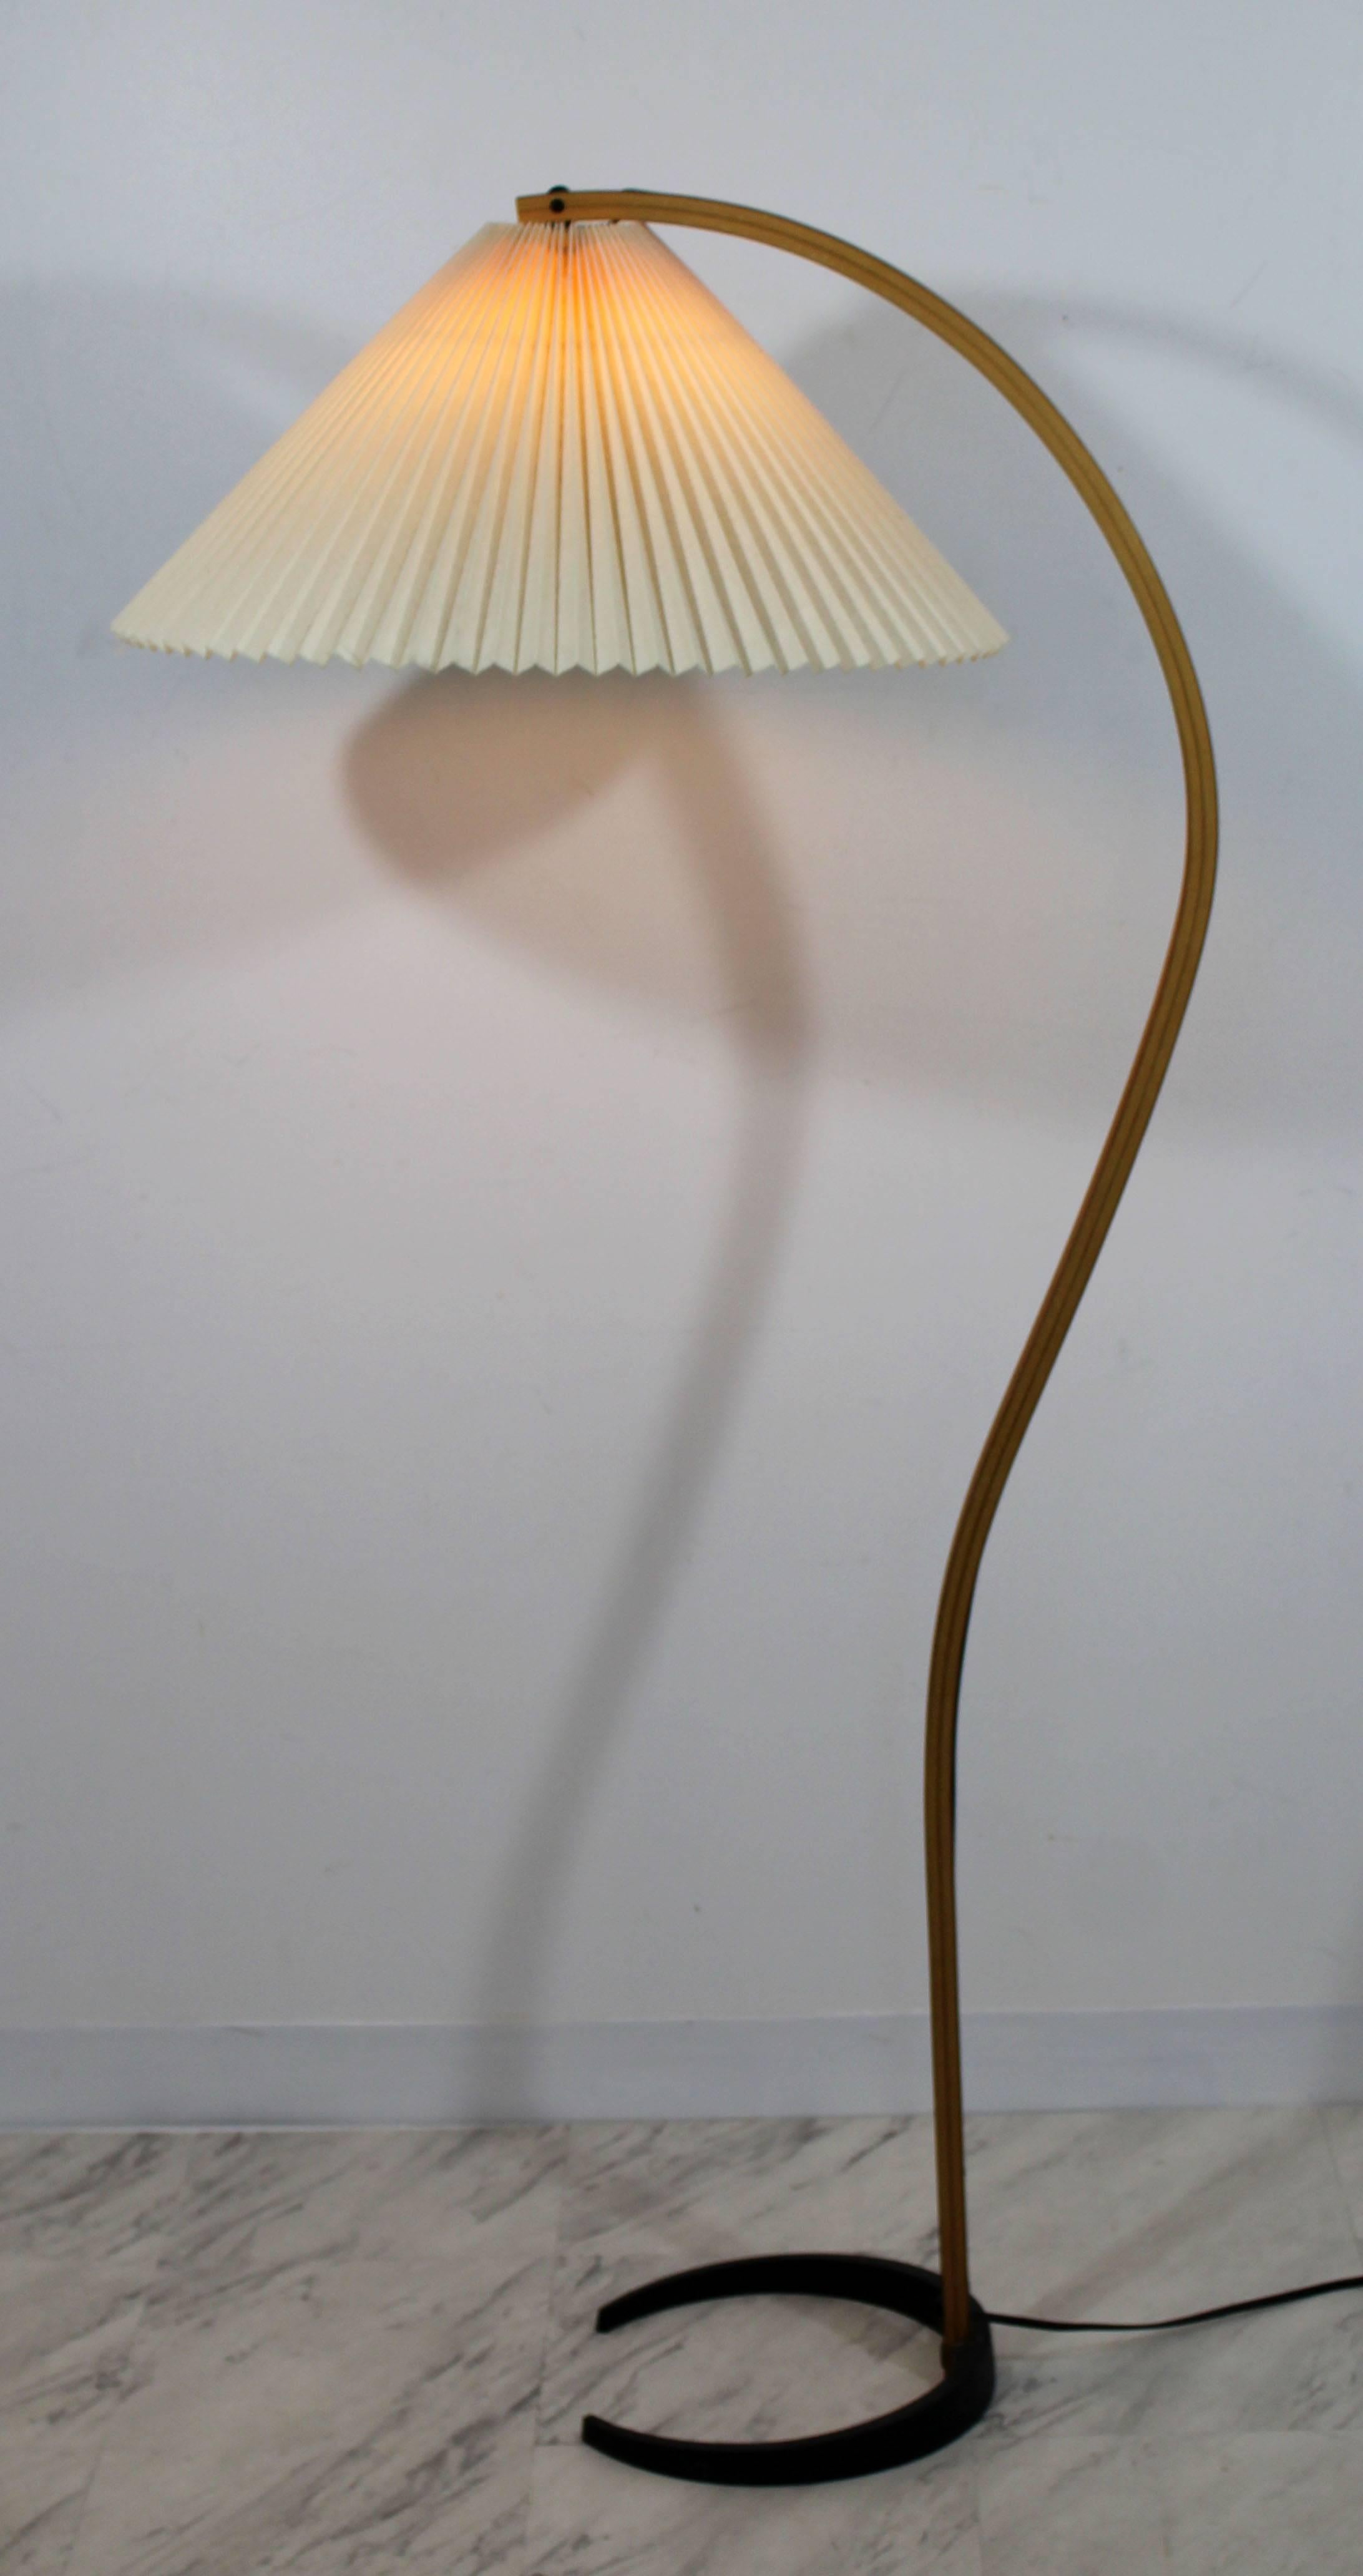 For your consideration is a gorgeous, bentwood, standing floor lamp, with original pleated shade and half moon, iron base, stamped Caprani Lights. In excellent condition. The dimensions of the lamp are 12